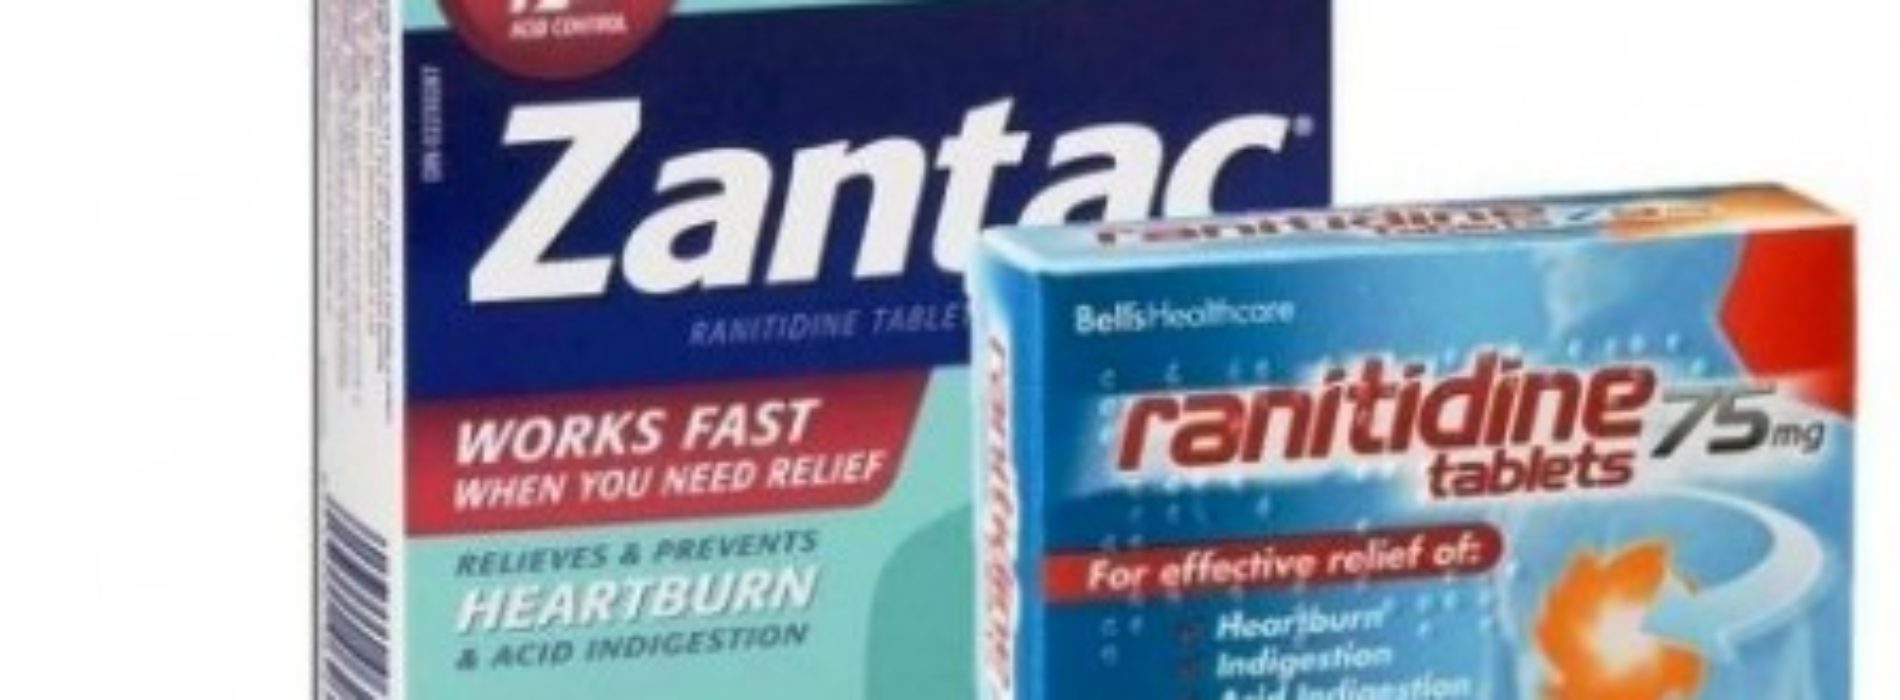 US pharmacy chains to stop sale of Zantac